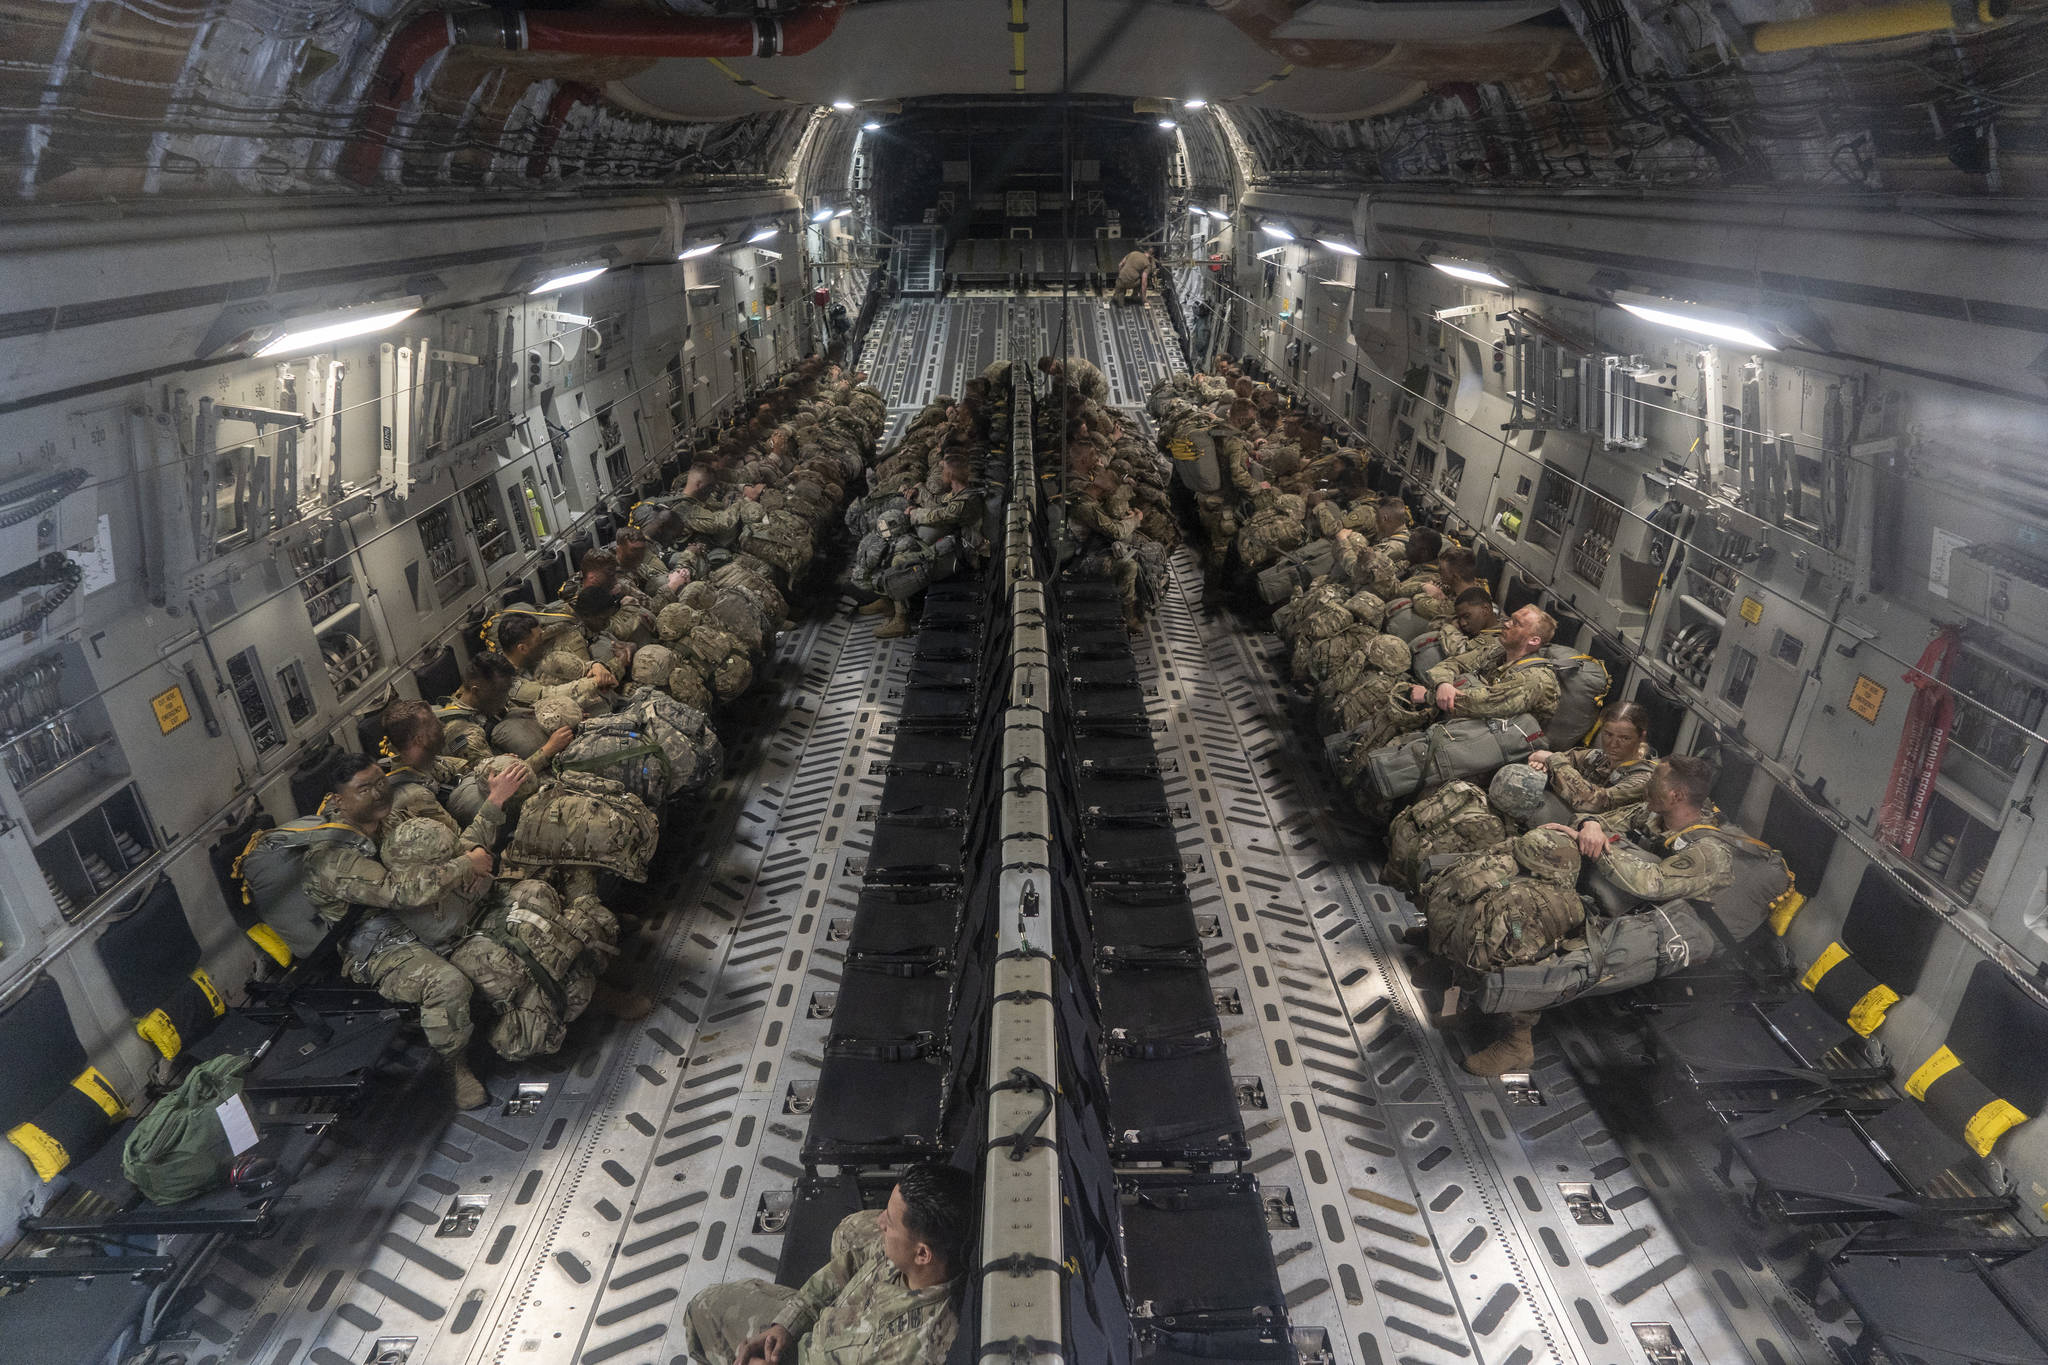 U.S. Army paratroopers assigned to the 1-40th Cavalry, 1st Squadron (Airborne), 25th Infantry Division prepare to jump at Donnelly training area in support of RED FLAG-Alaska on June 17th, 2021. (Airman 1st Class Mario Calabro / U.S. Air Force)